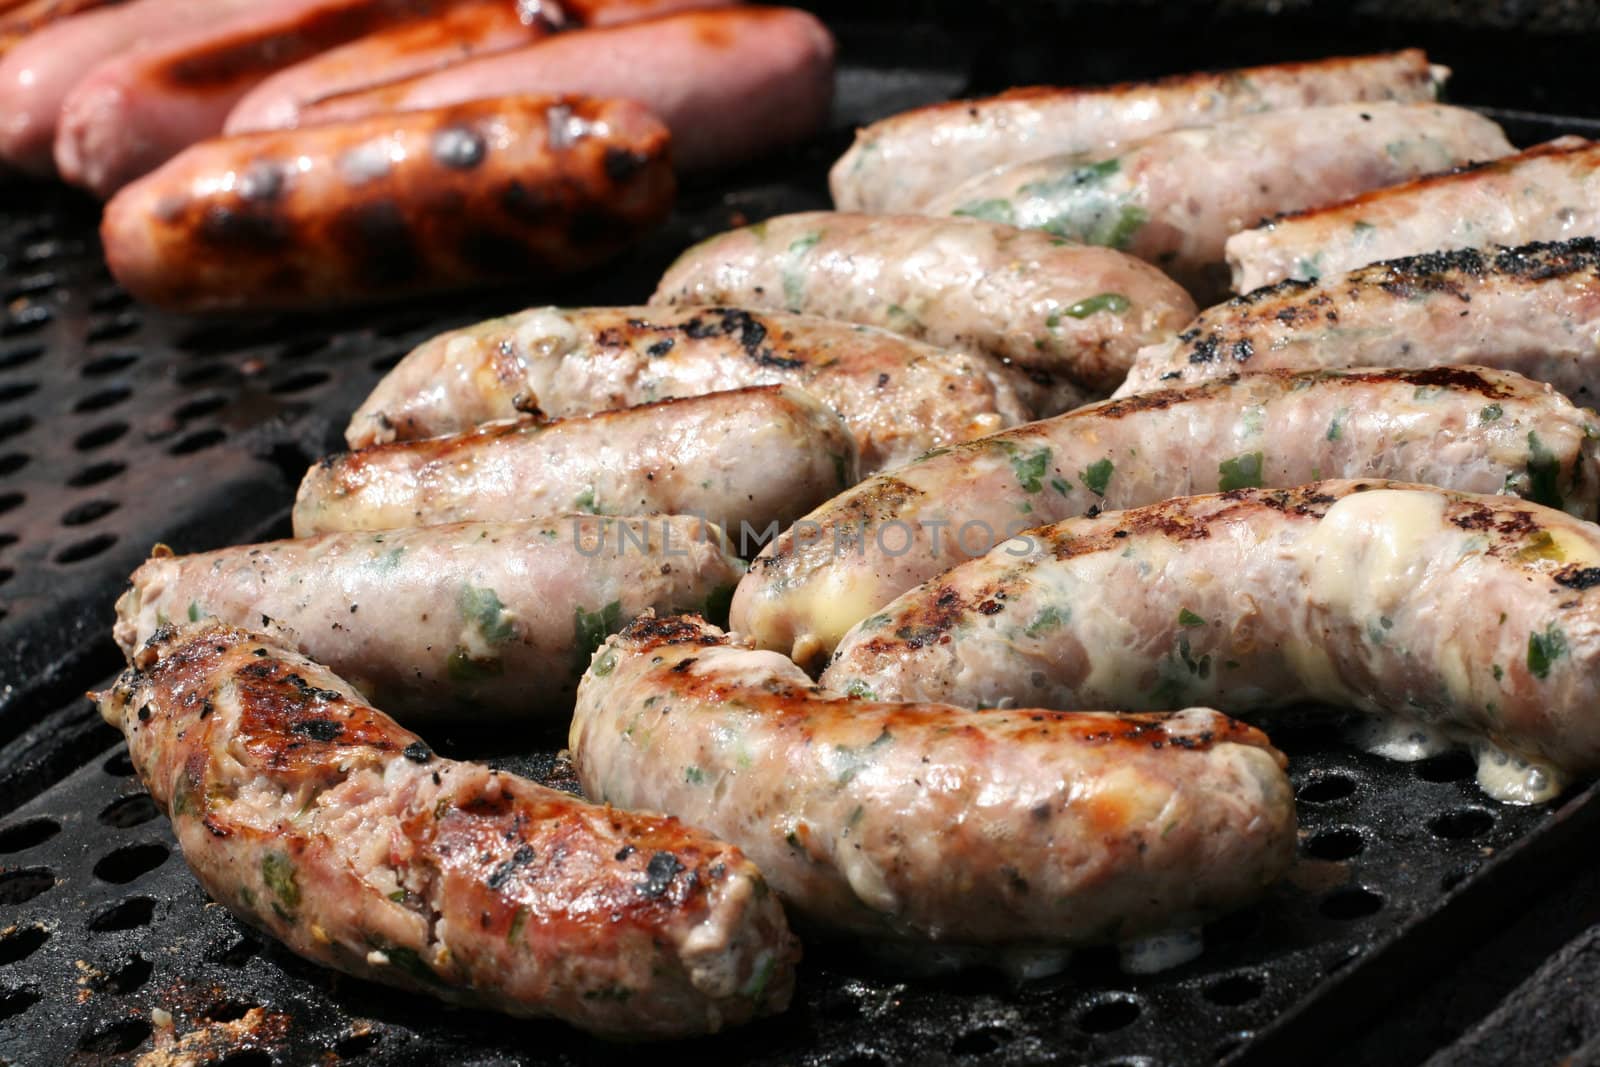 Maltese and pork sausages on a barbecue